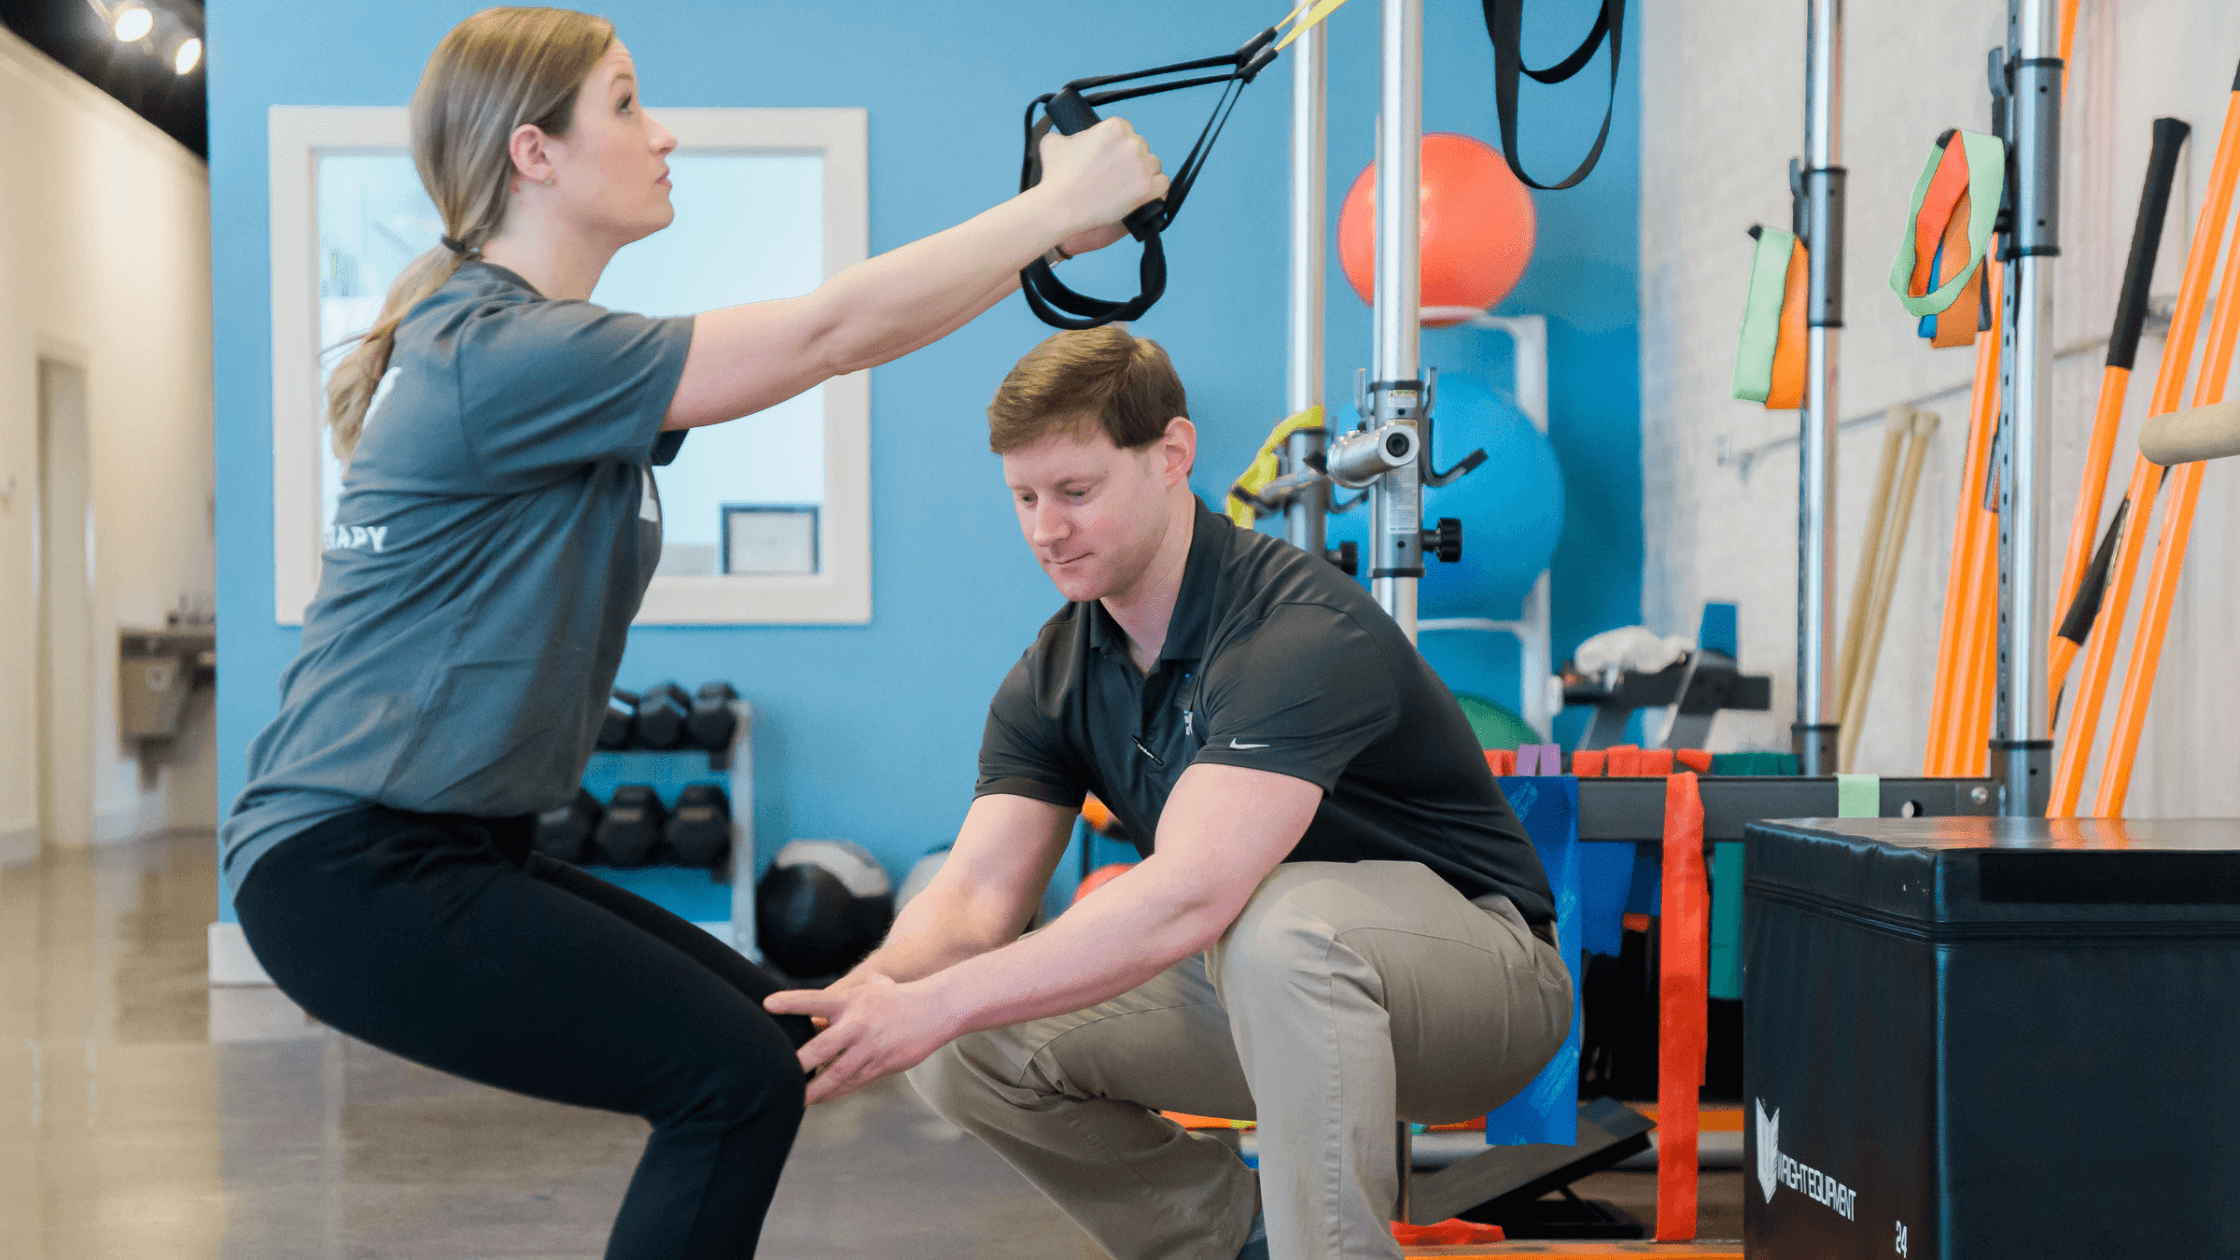 How to Choose the Right Physical Therapist: 8 Top Tips